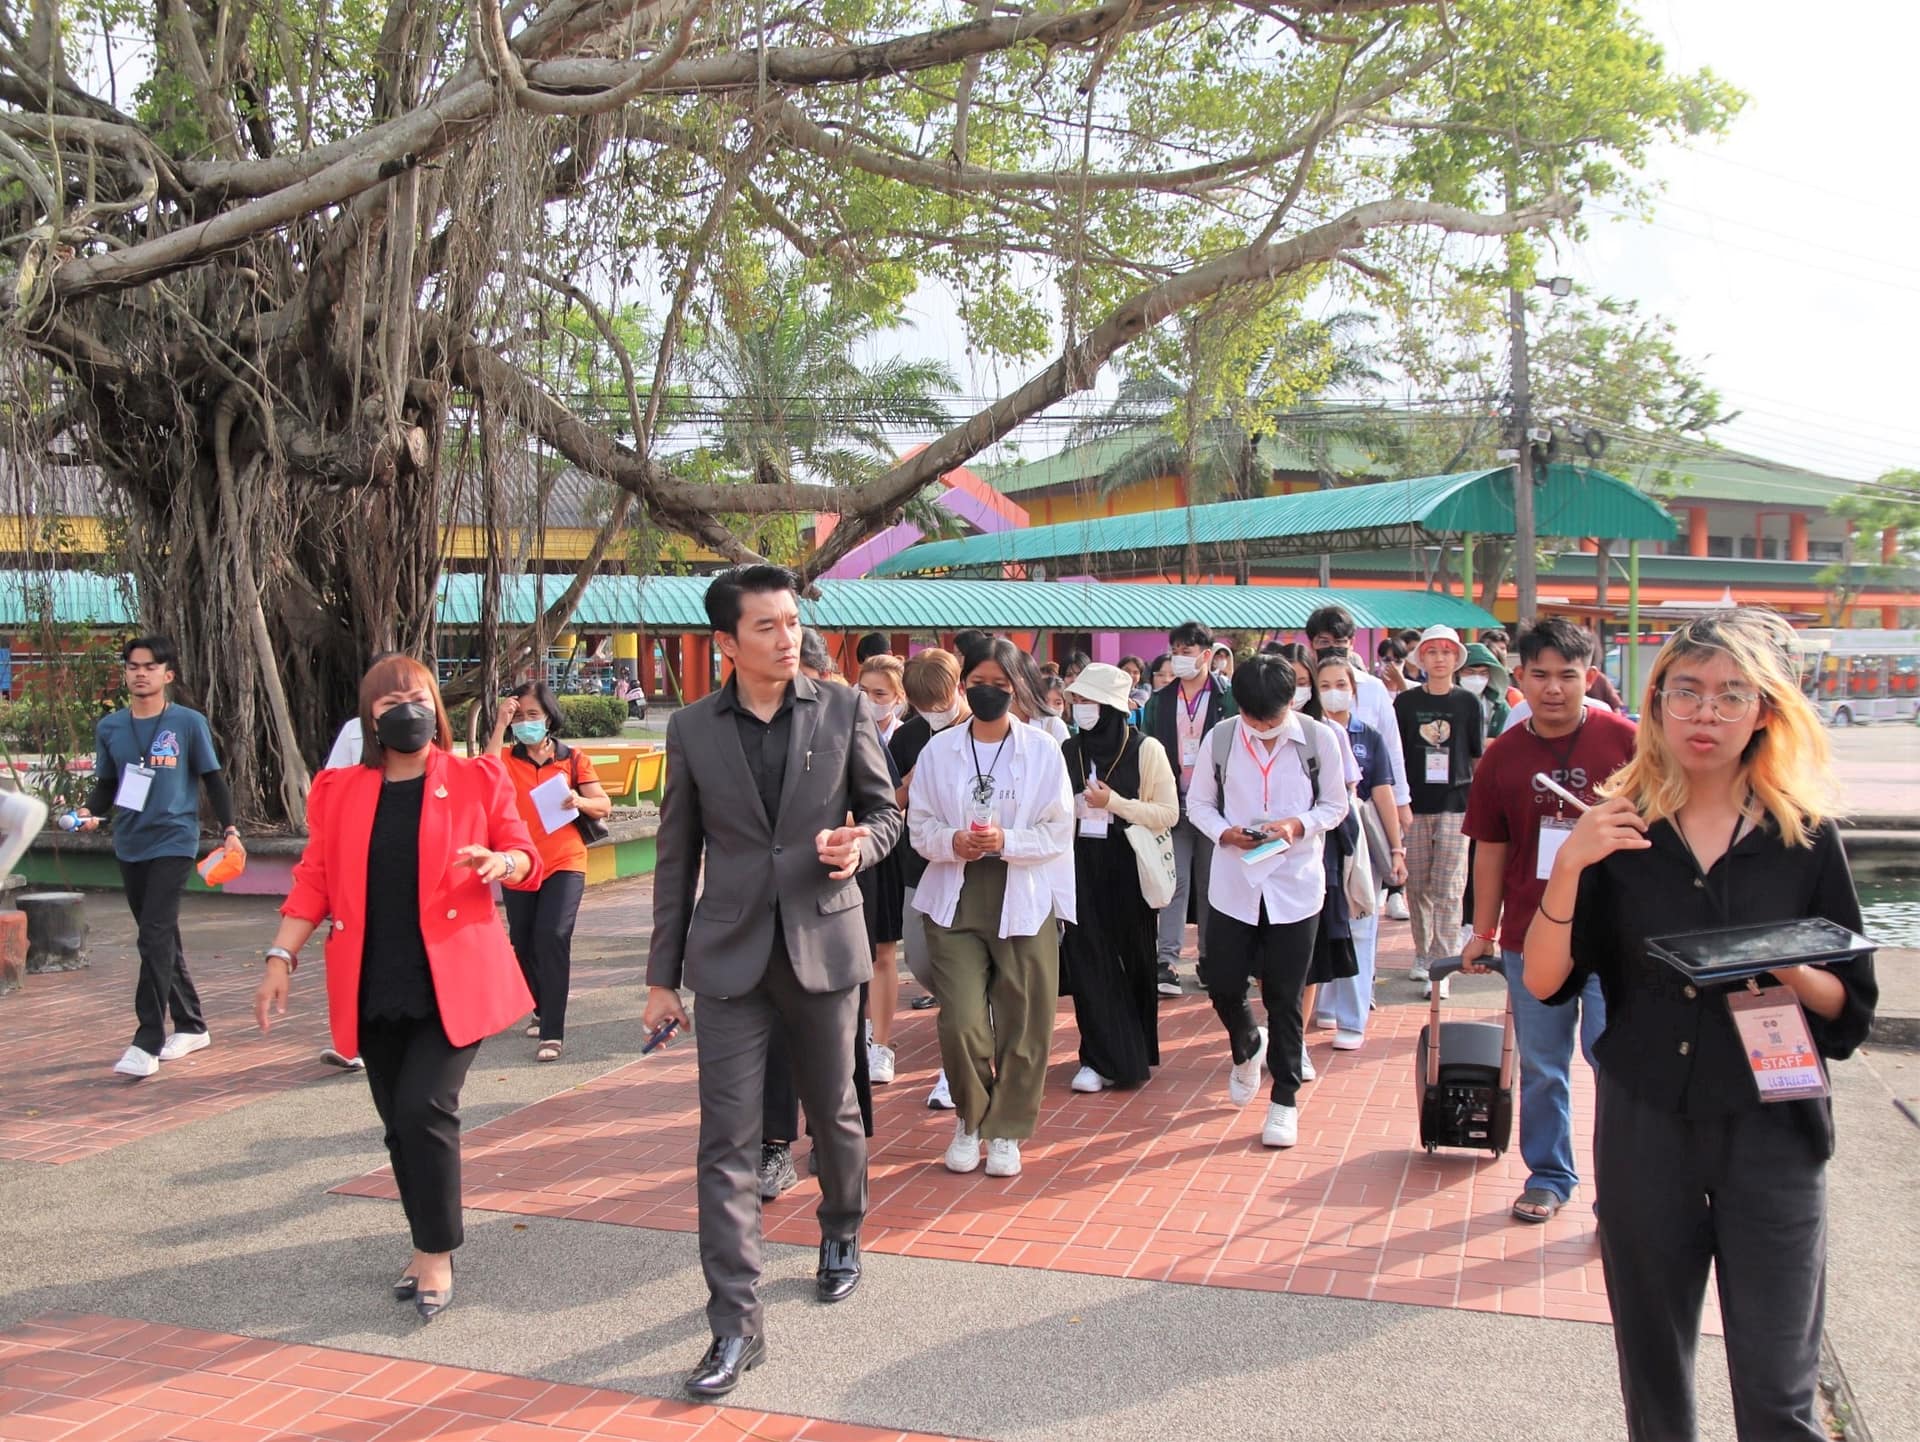 WUIC Students joined Walk'n Talk for Change event, organized by The Student Council of Walailak University